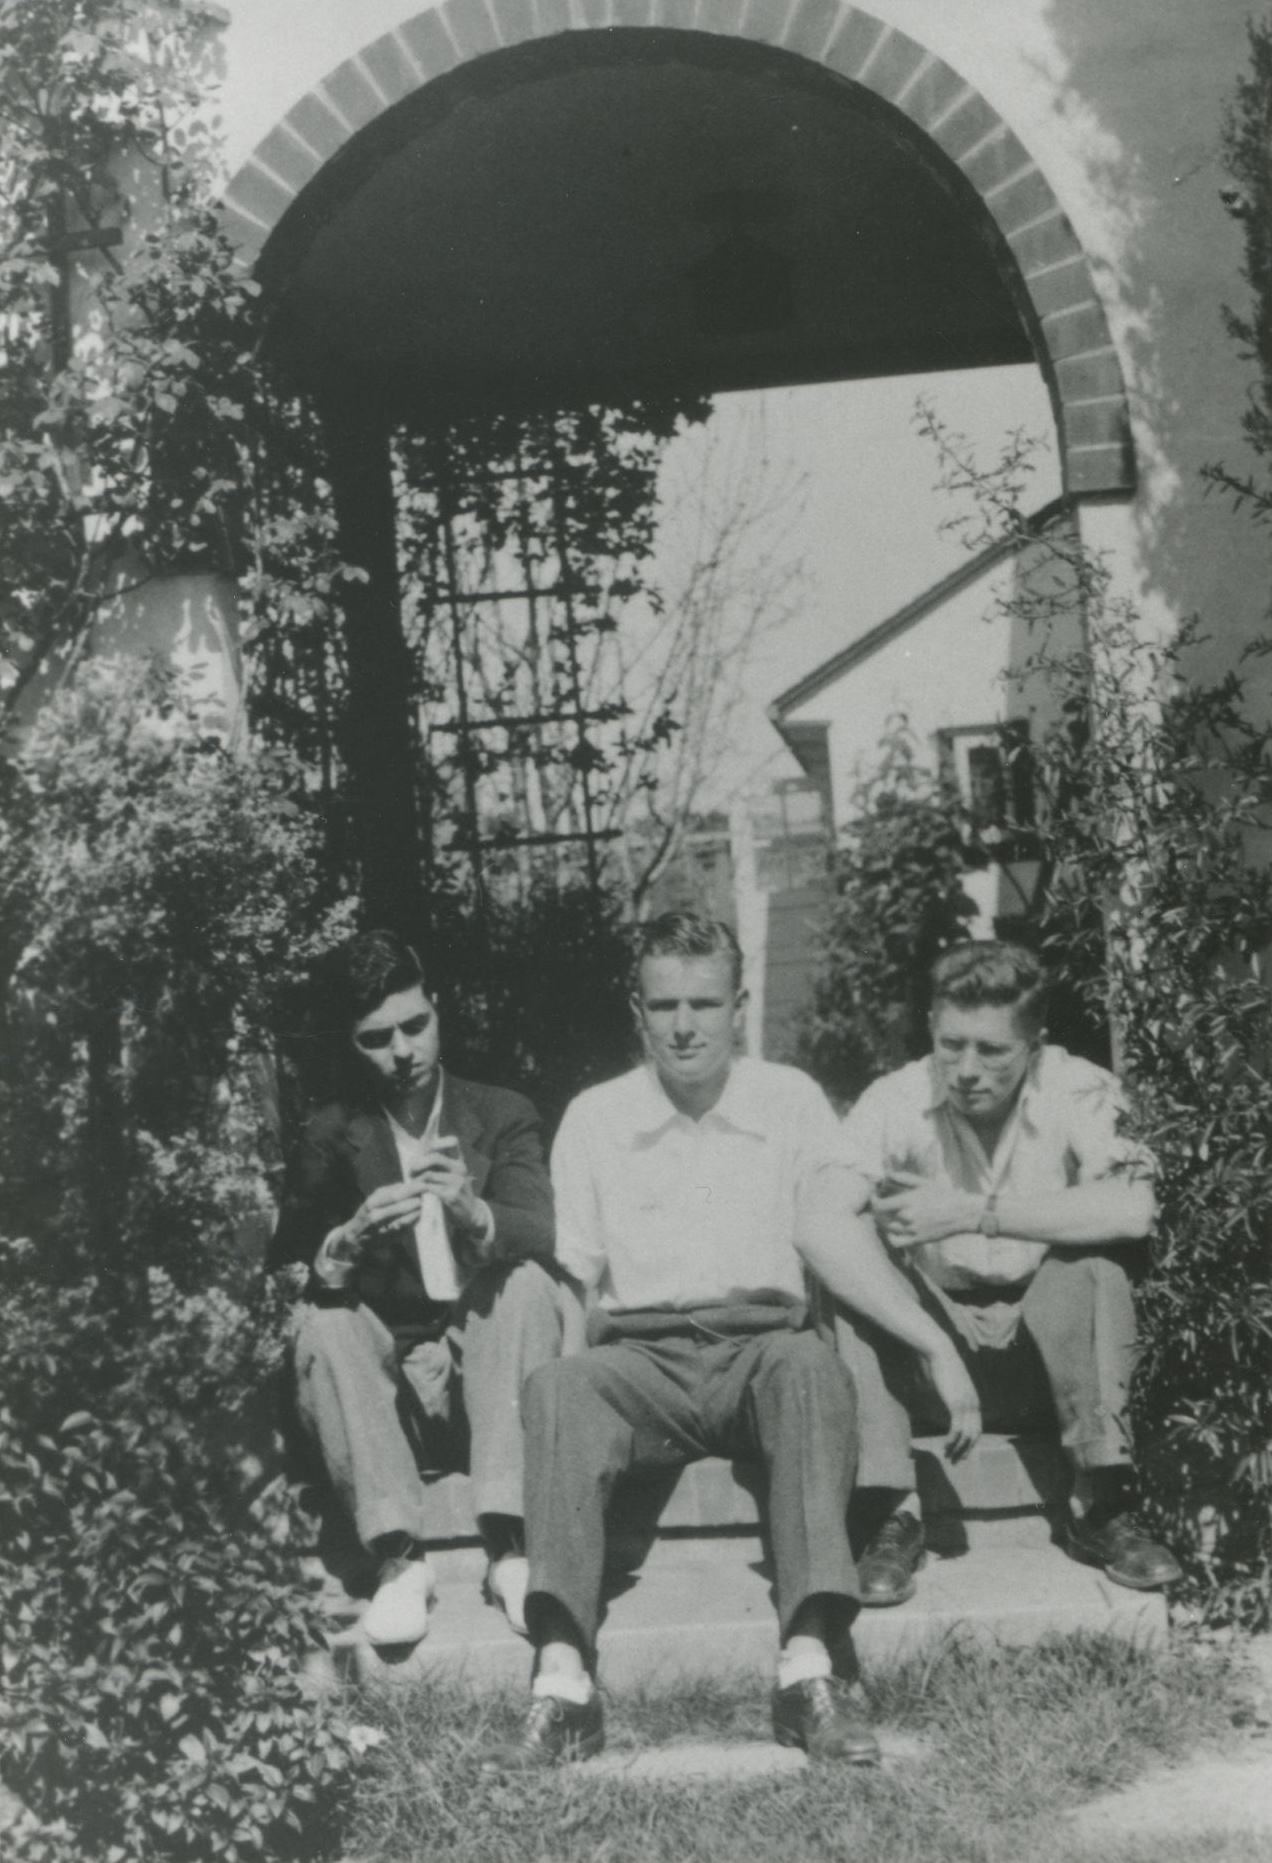 Motherwell (center) with Manuel Cardoza (left) and John Steelquist (right), Stanford University, California, 1934